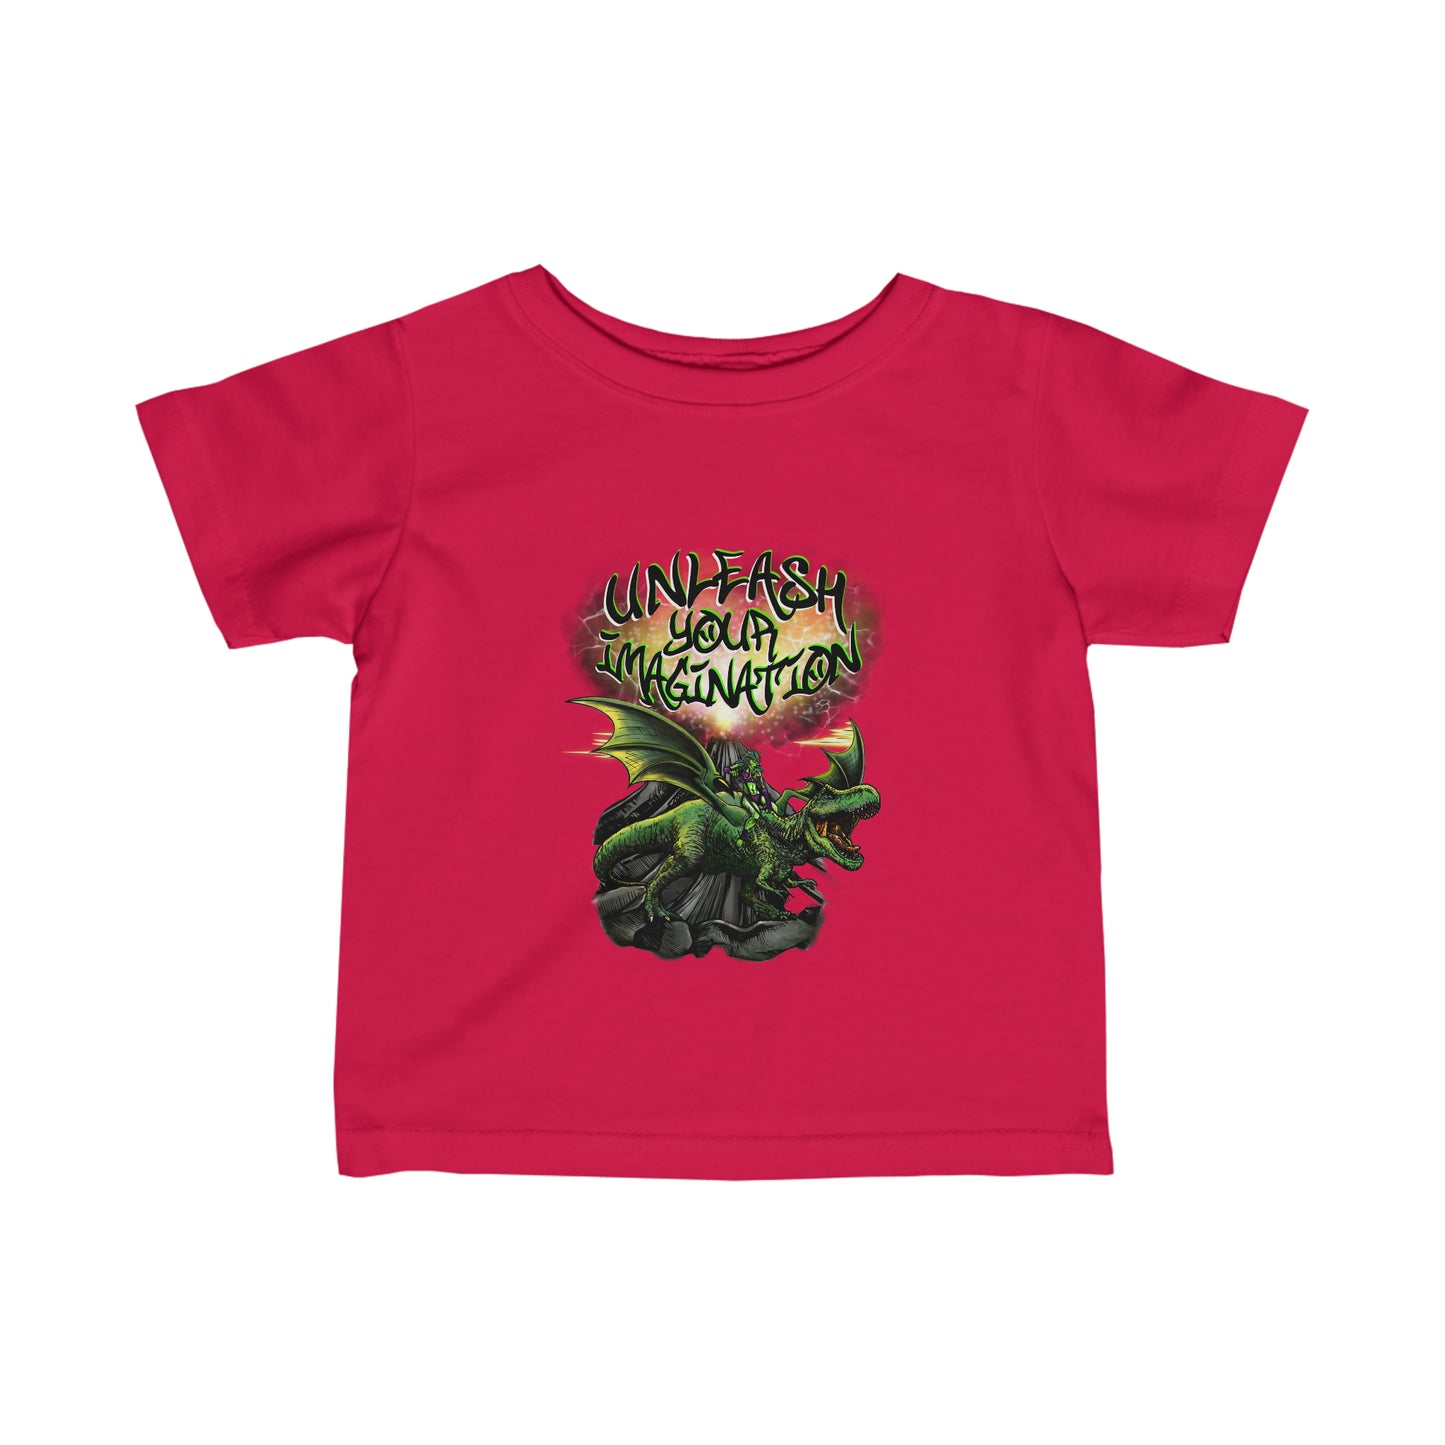 Unleash your Imagination, green Letters Infant Fine Jersey Tee